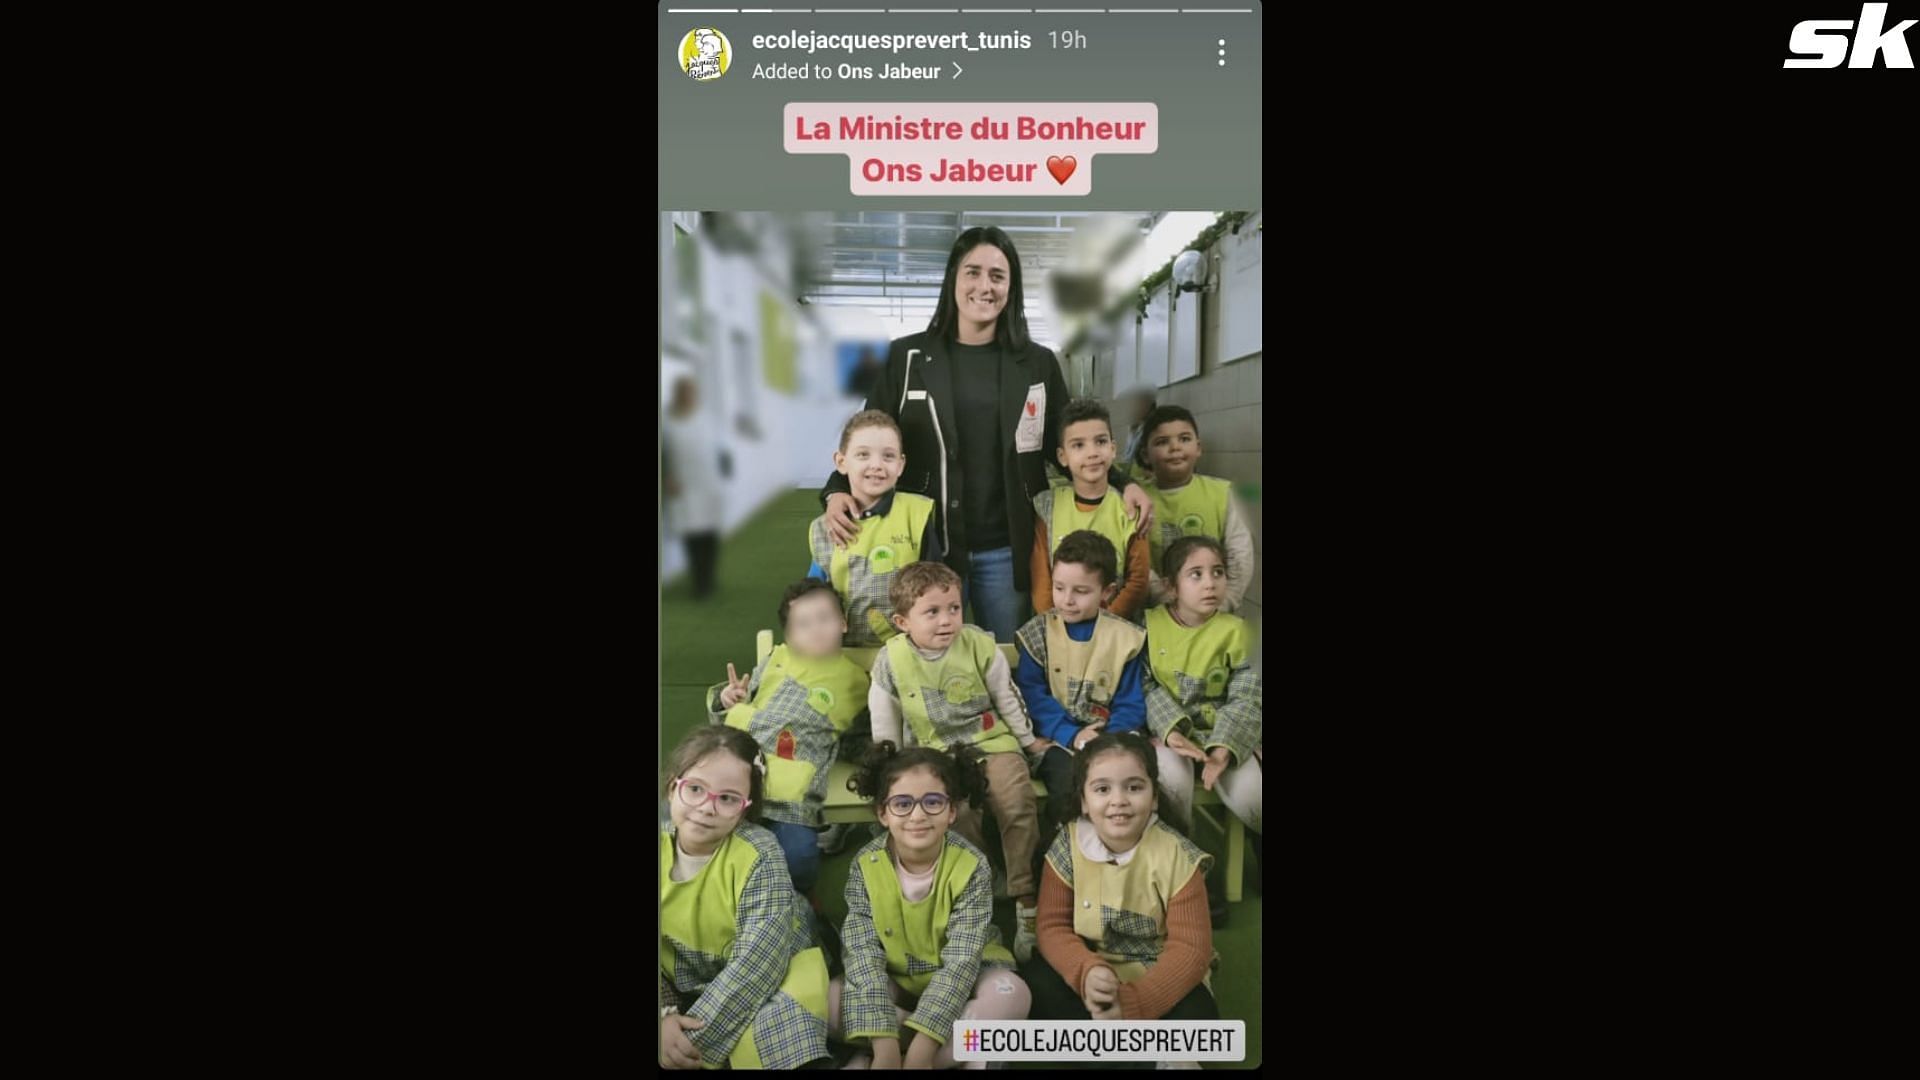 Ons Jabeur with the children of Ecole Jacques Prevert Elementary School - @ecolejacquesprevert_tunis, Instagram